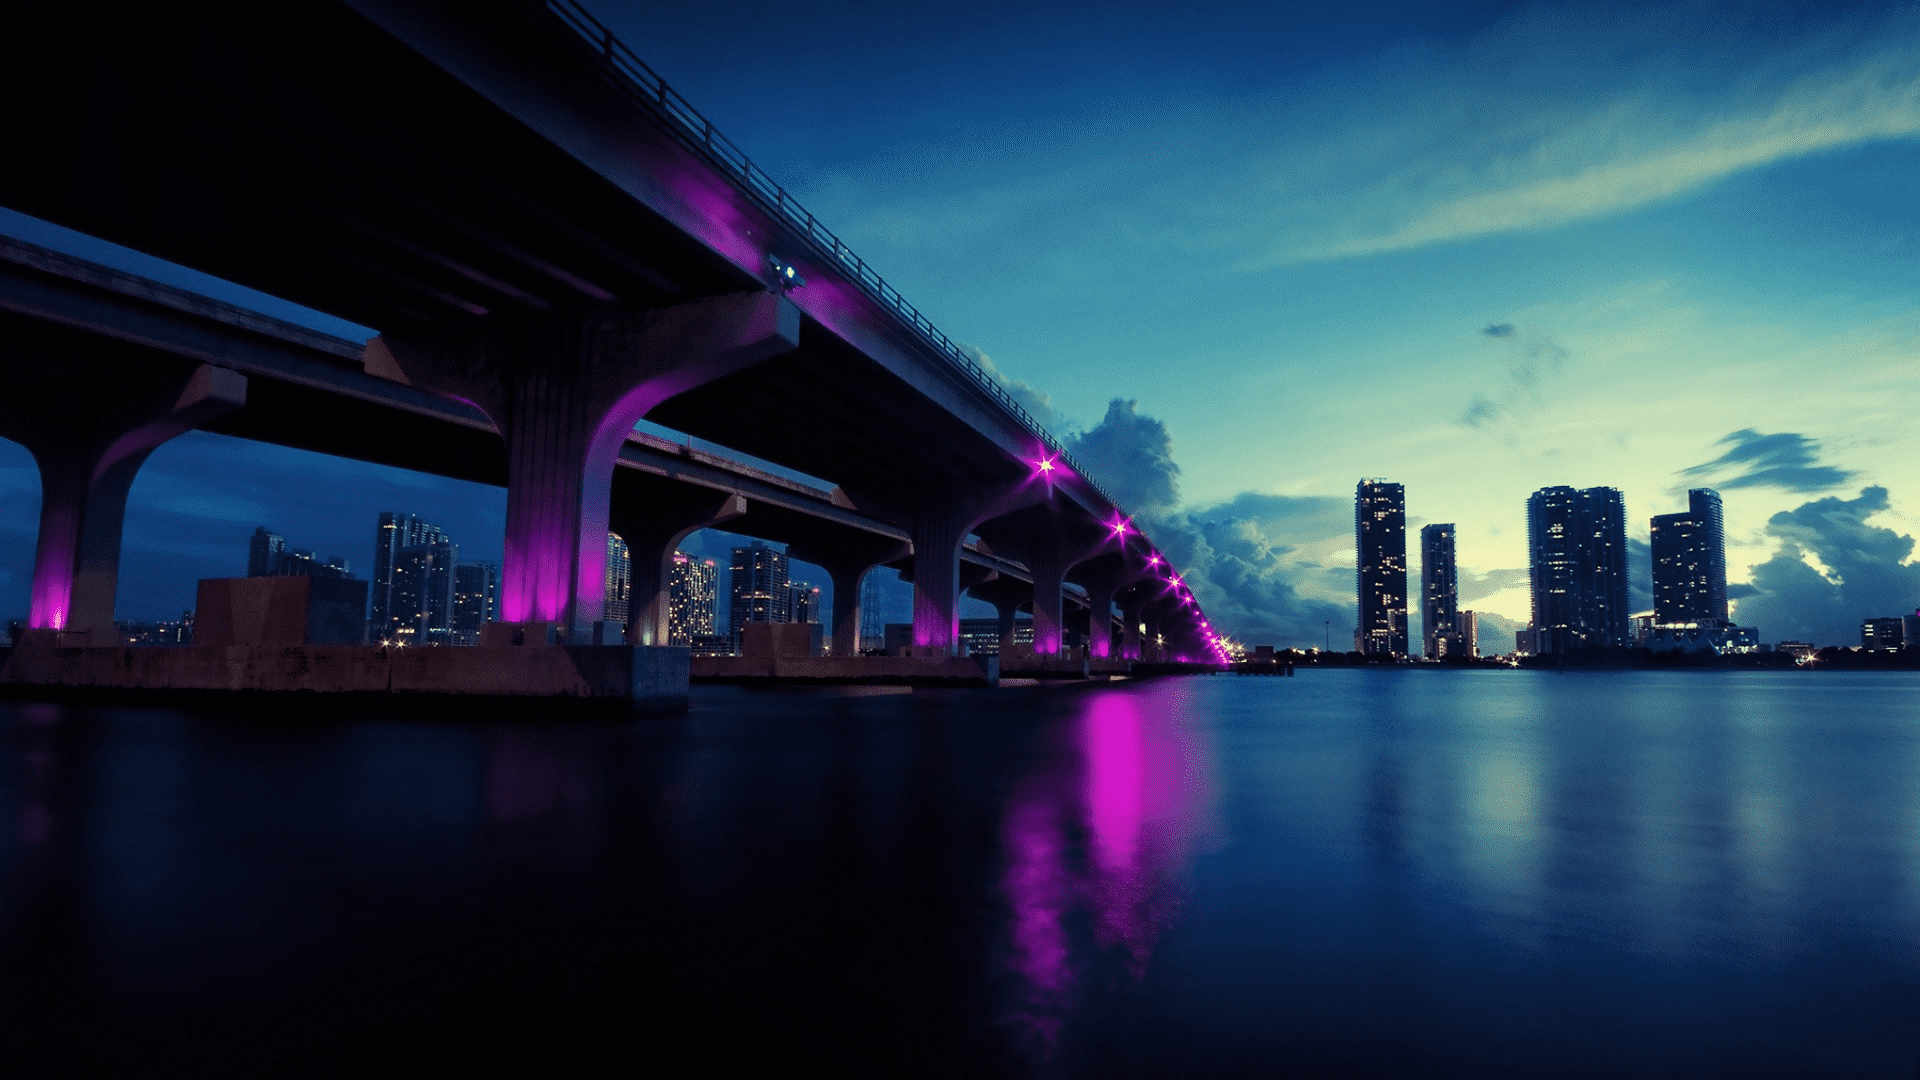 A bridge over water with lights on it - Miami